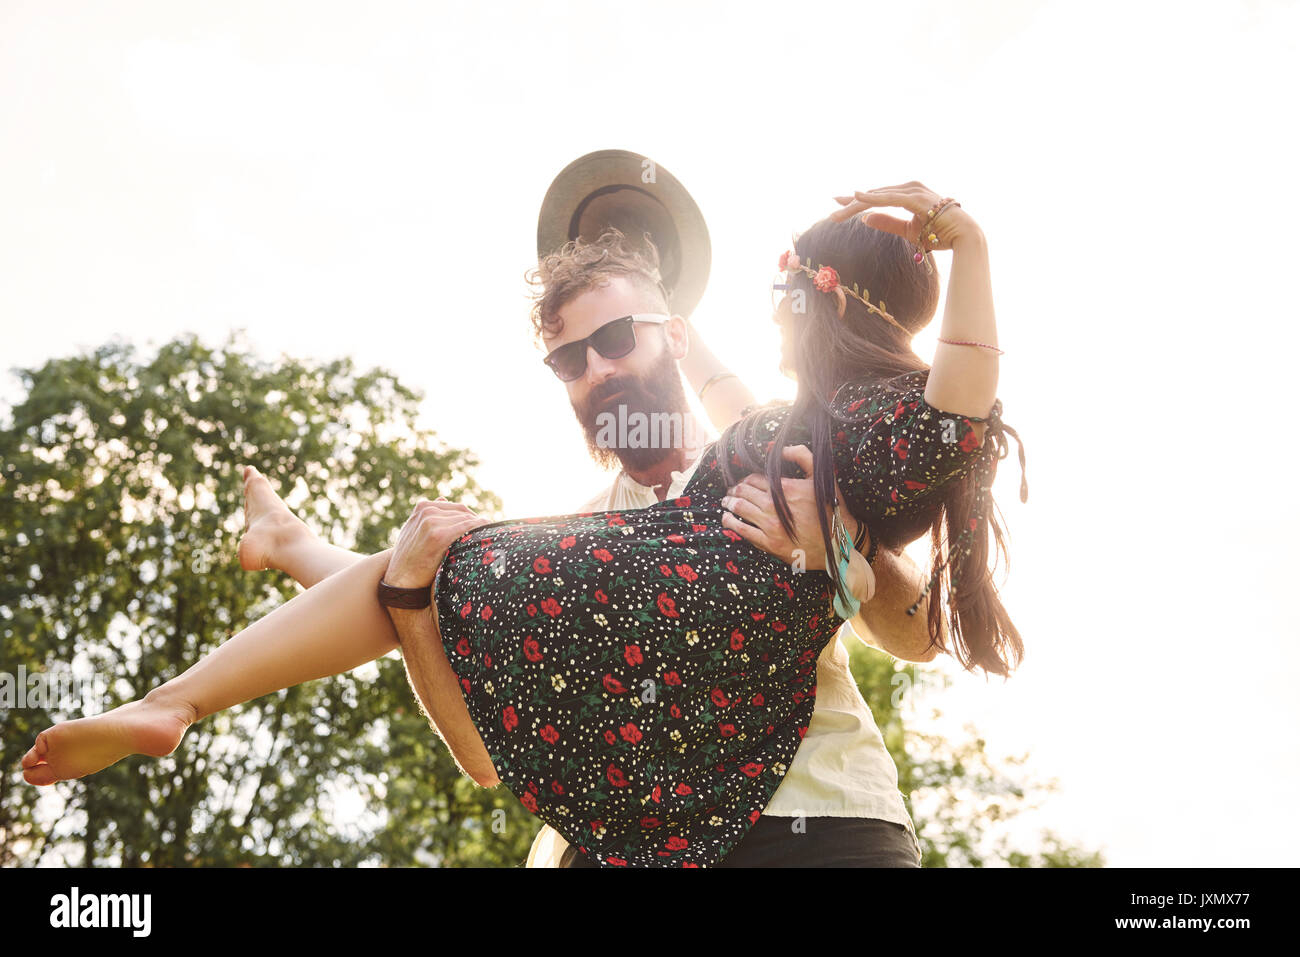 Young man carrying boho girlfriend in arms at festival Stock Photo